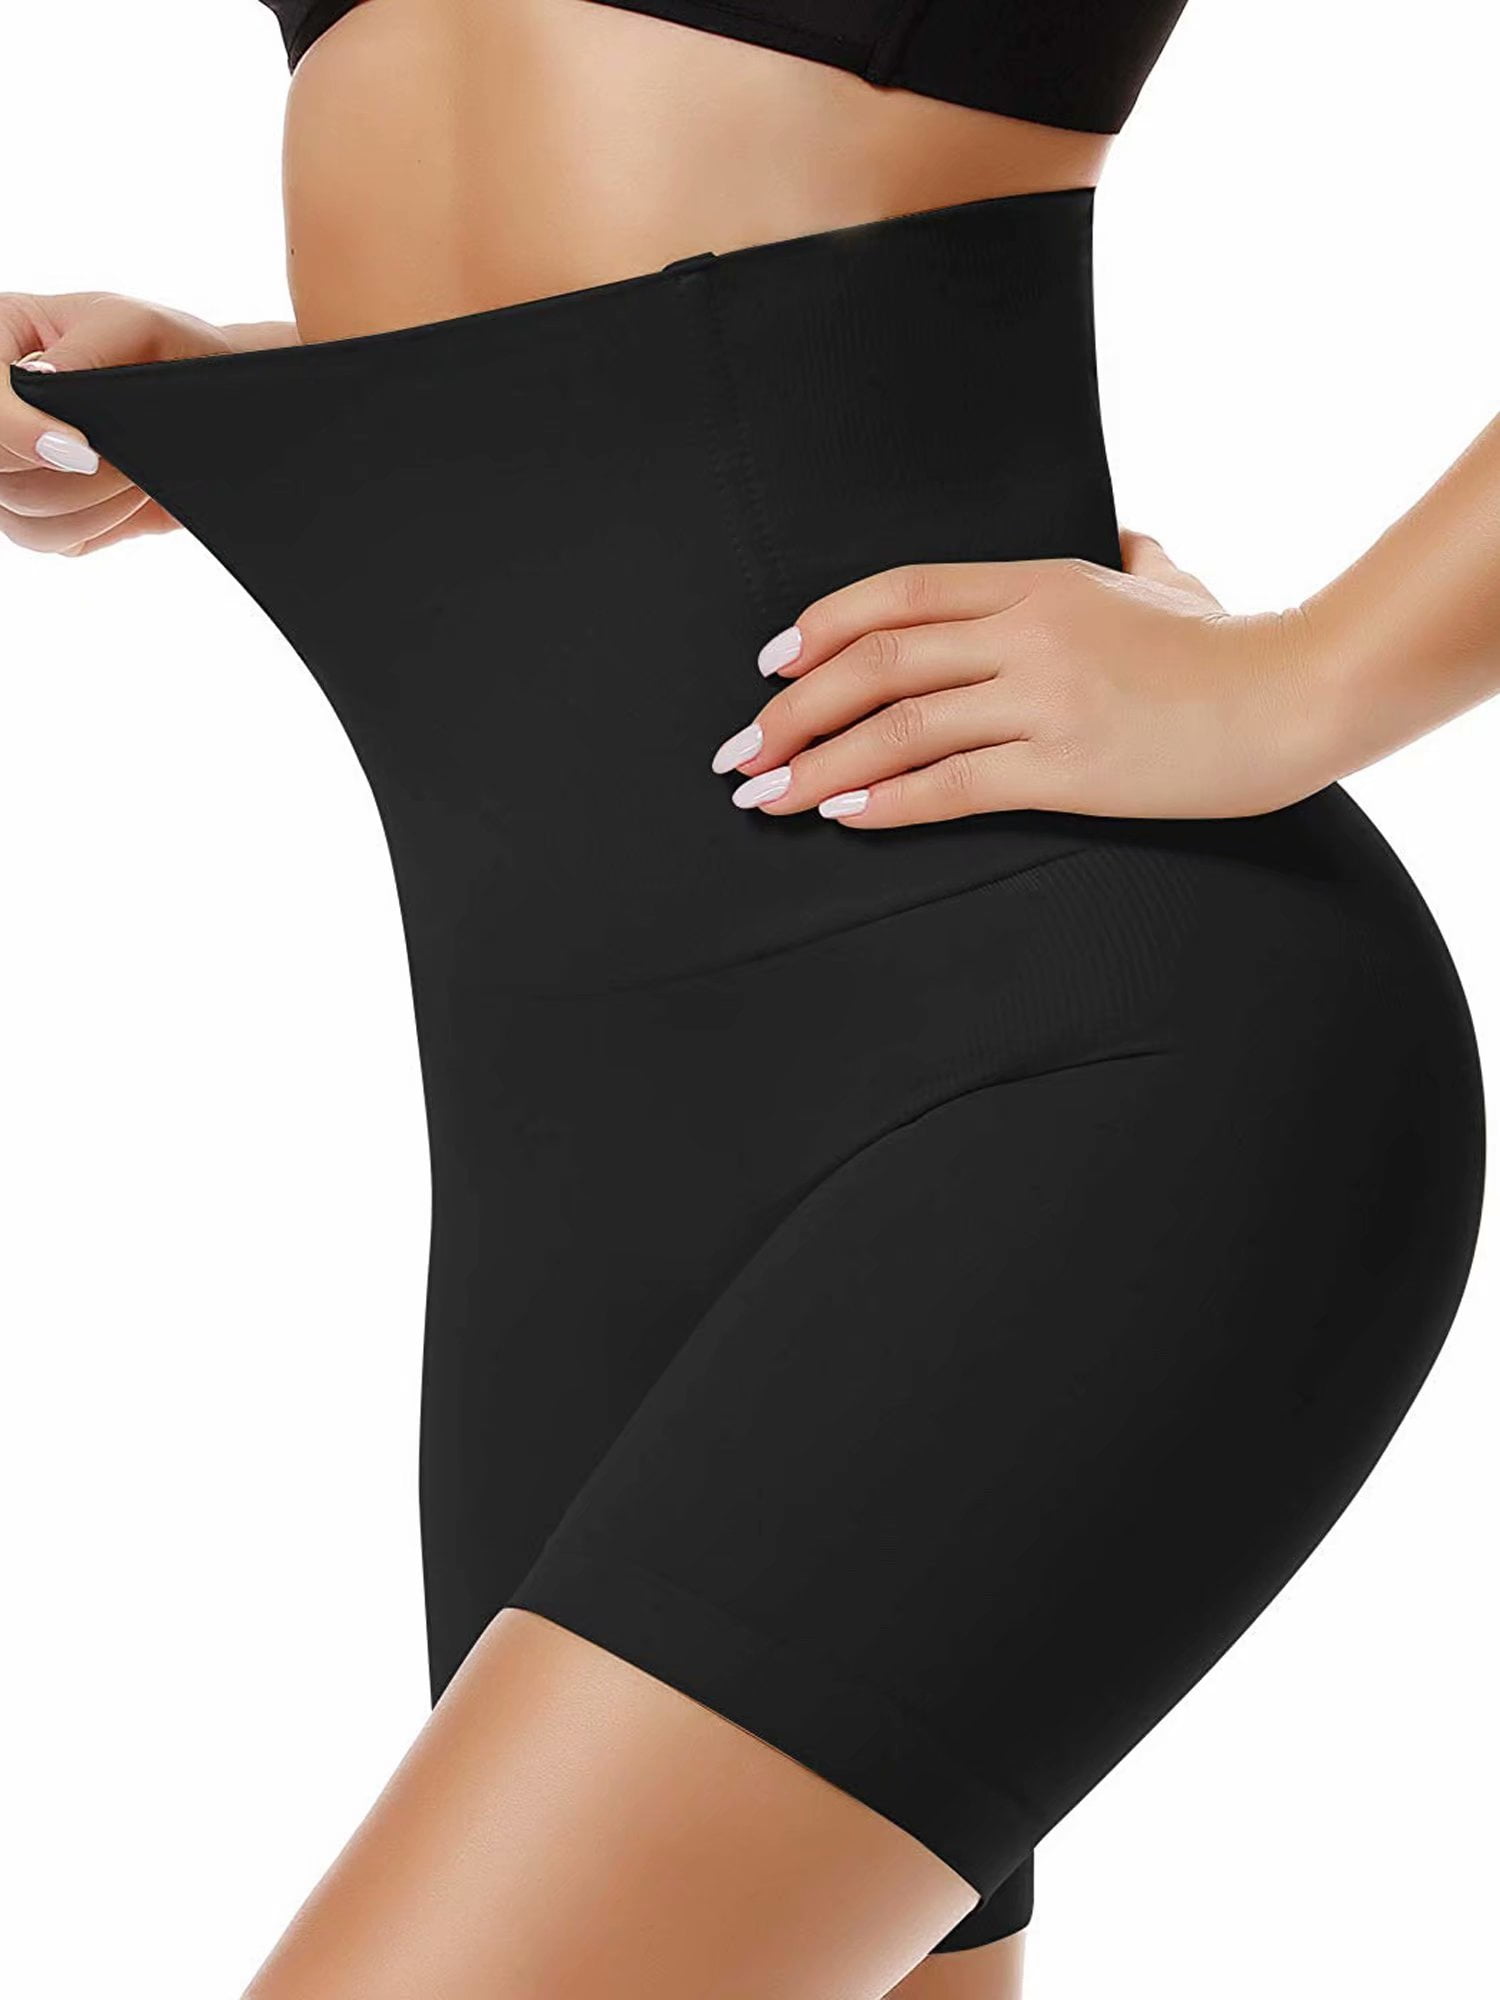 Womens High Waist Stretch Tummy Control Body Shaper Panties Breathable 5 Colors